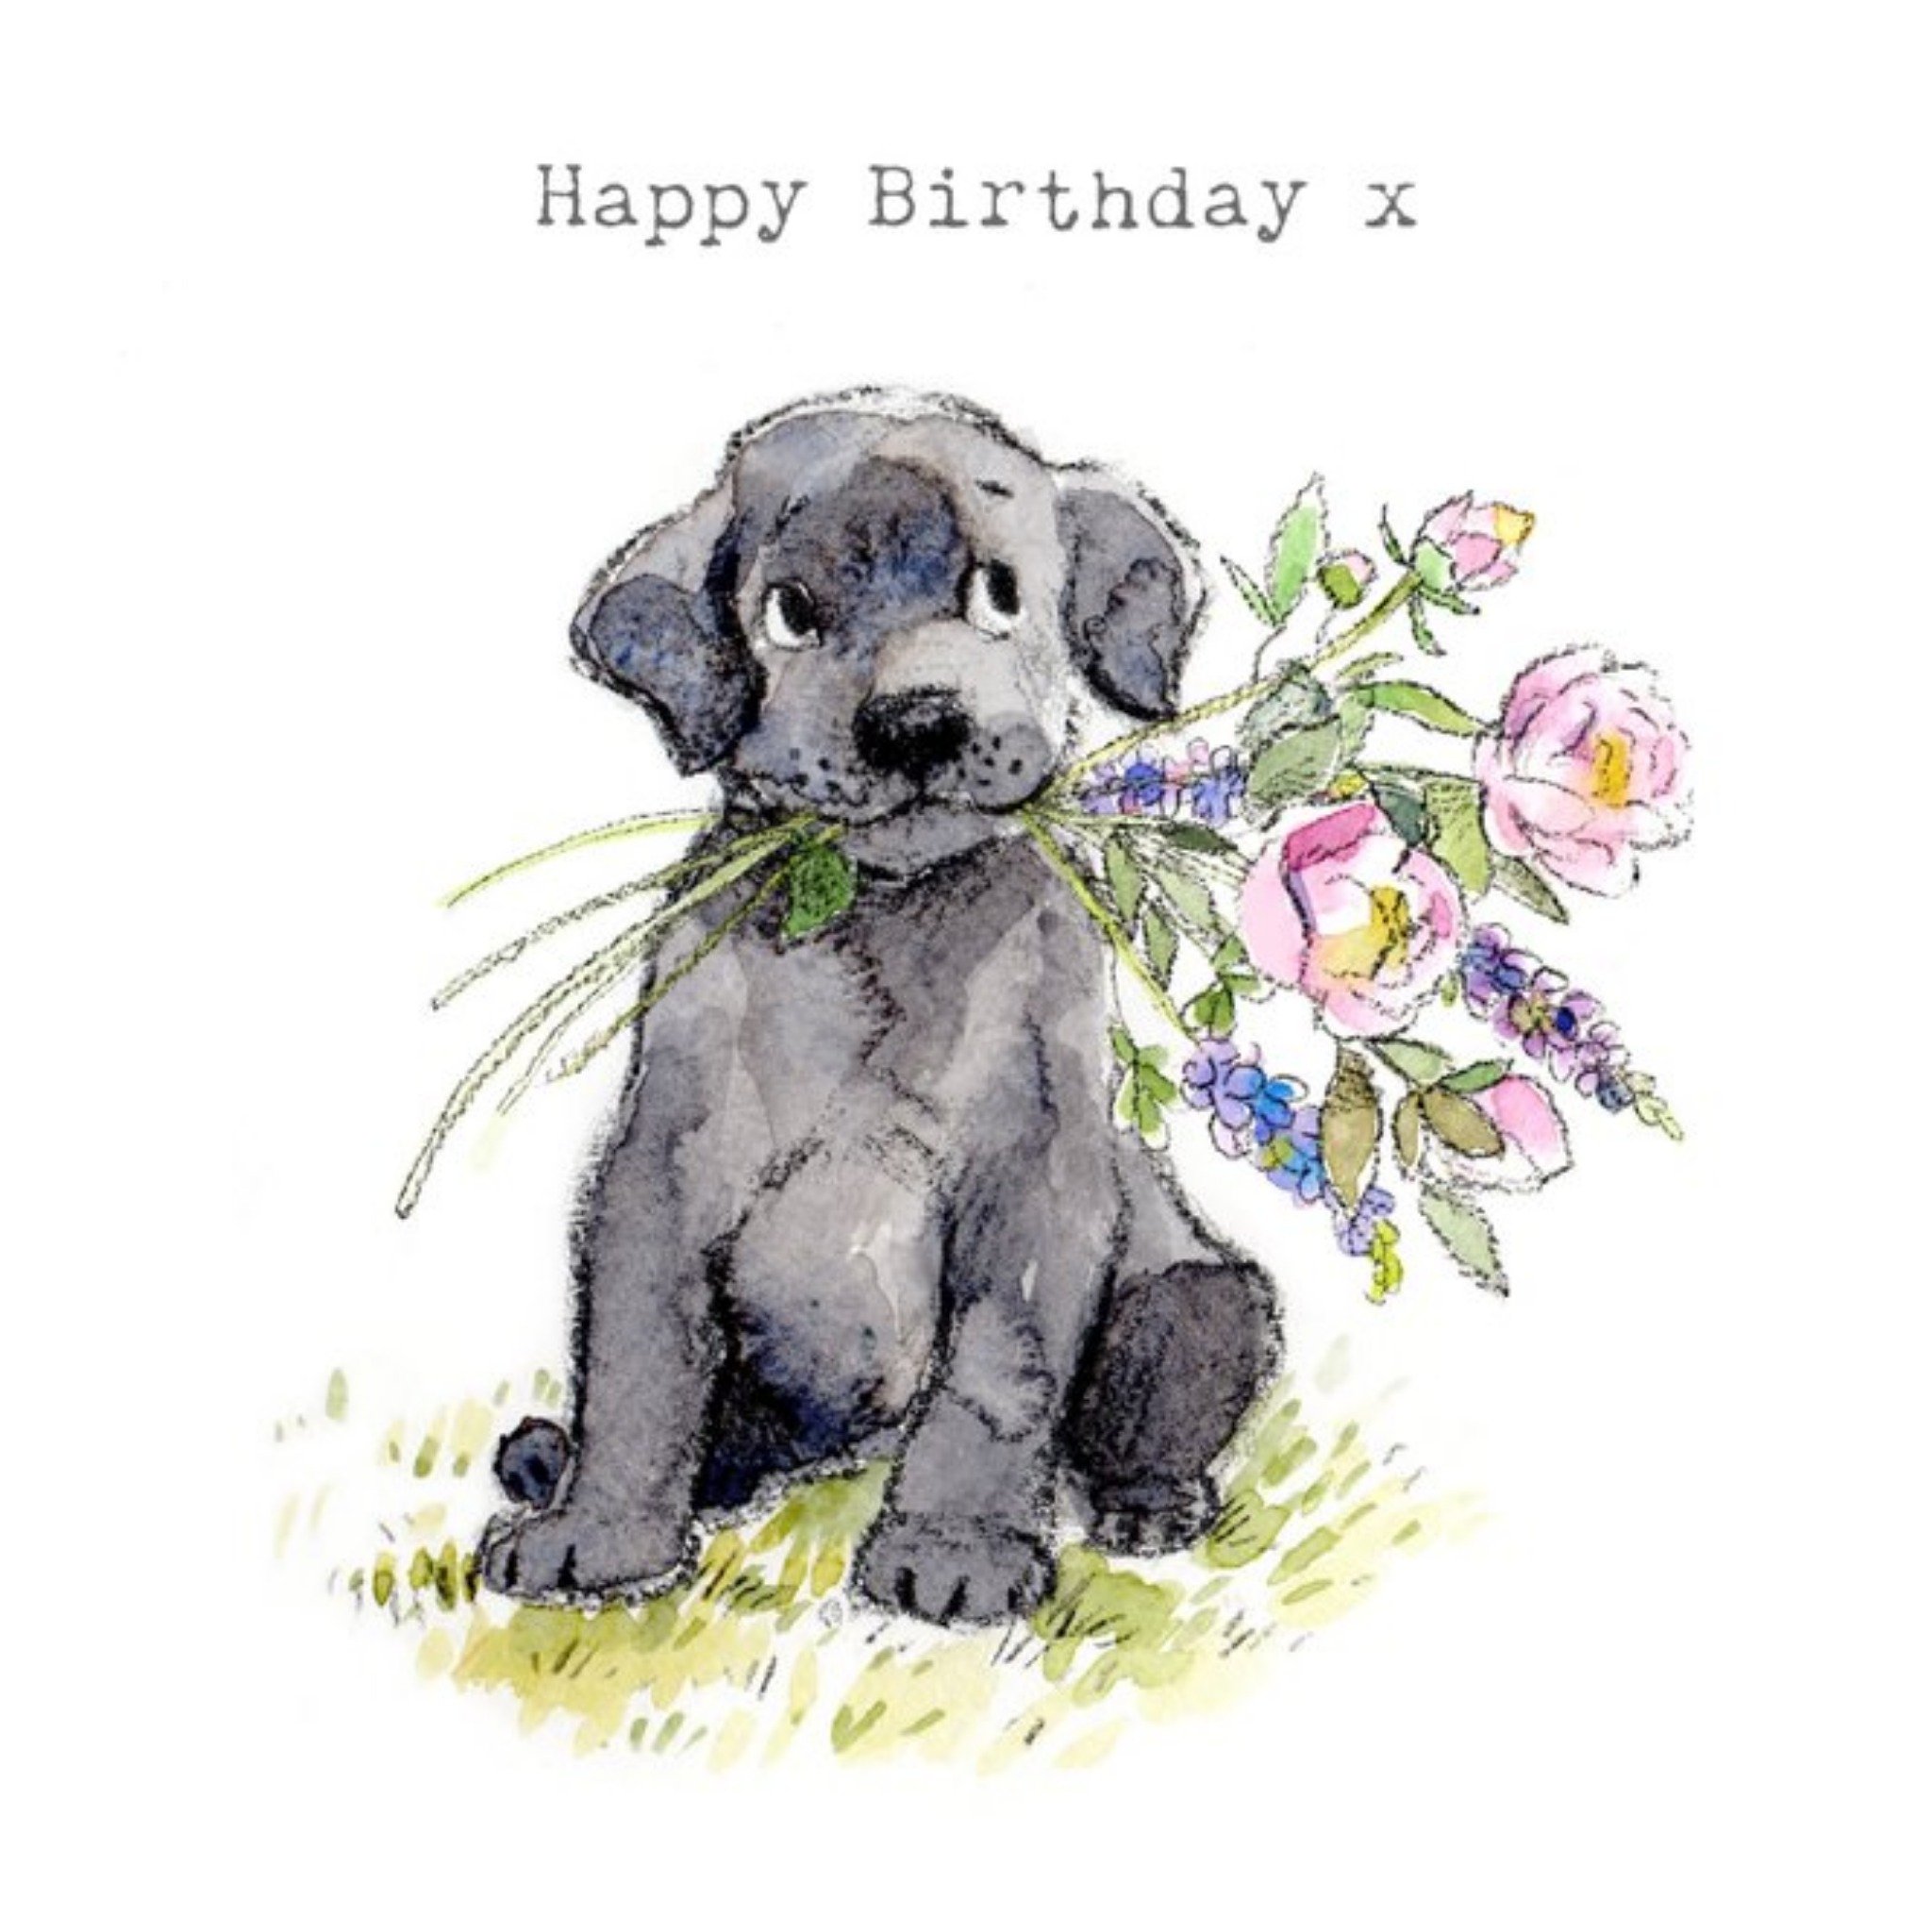 Moonpig Cute Illustrated Labrador Puppy With Flowers Birthday Card, Square